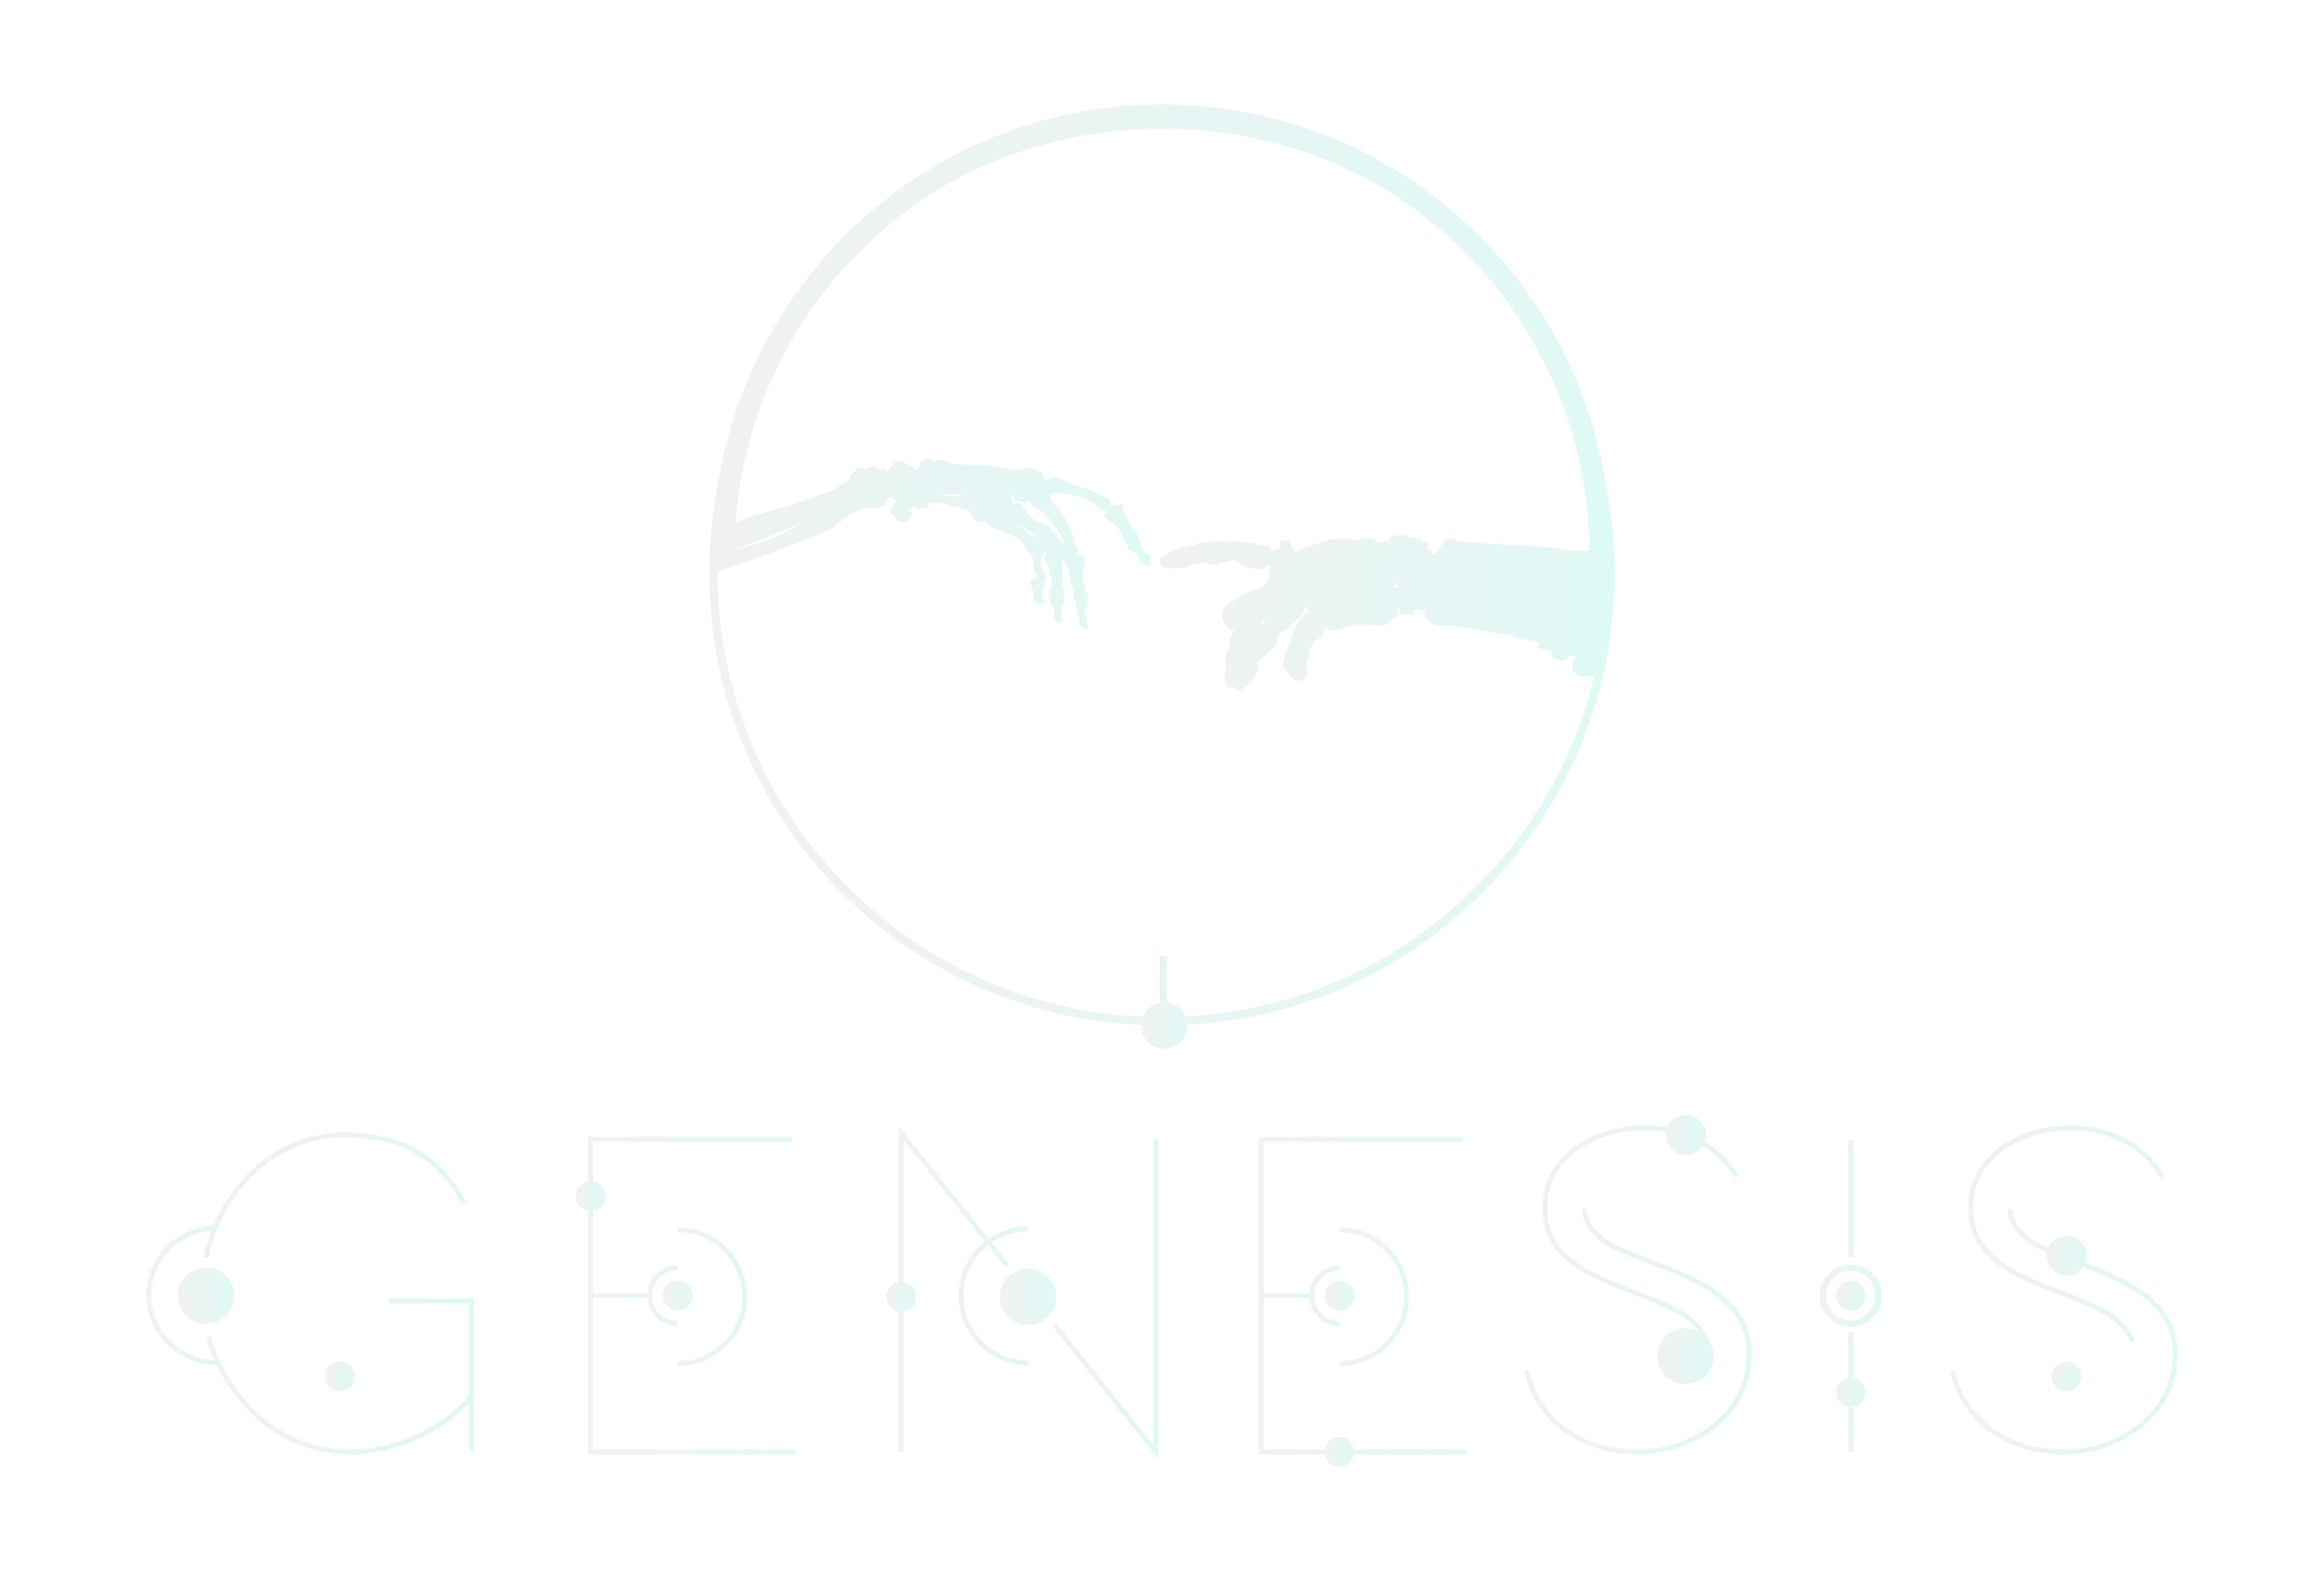 Blue and white logo with transparent background for Genesis Augmented Reality game